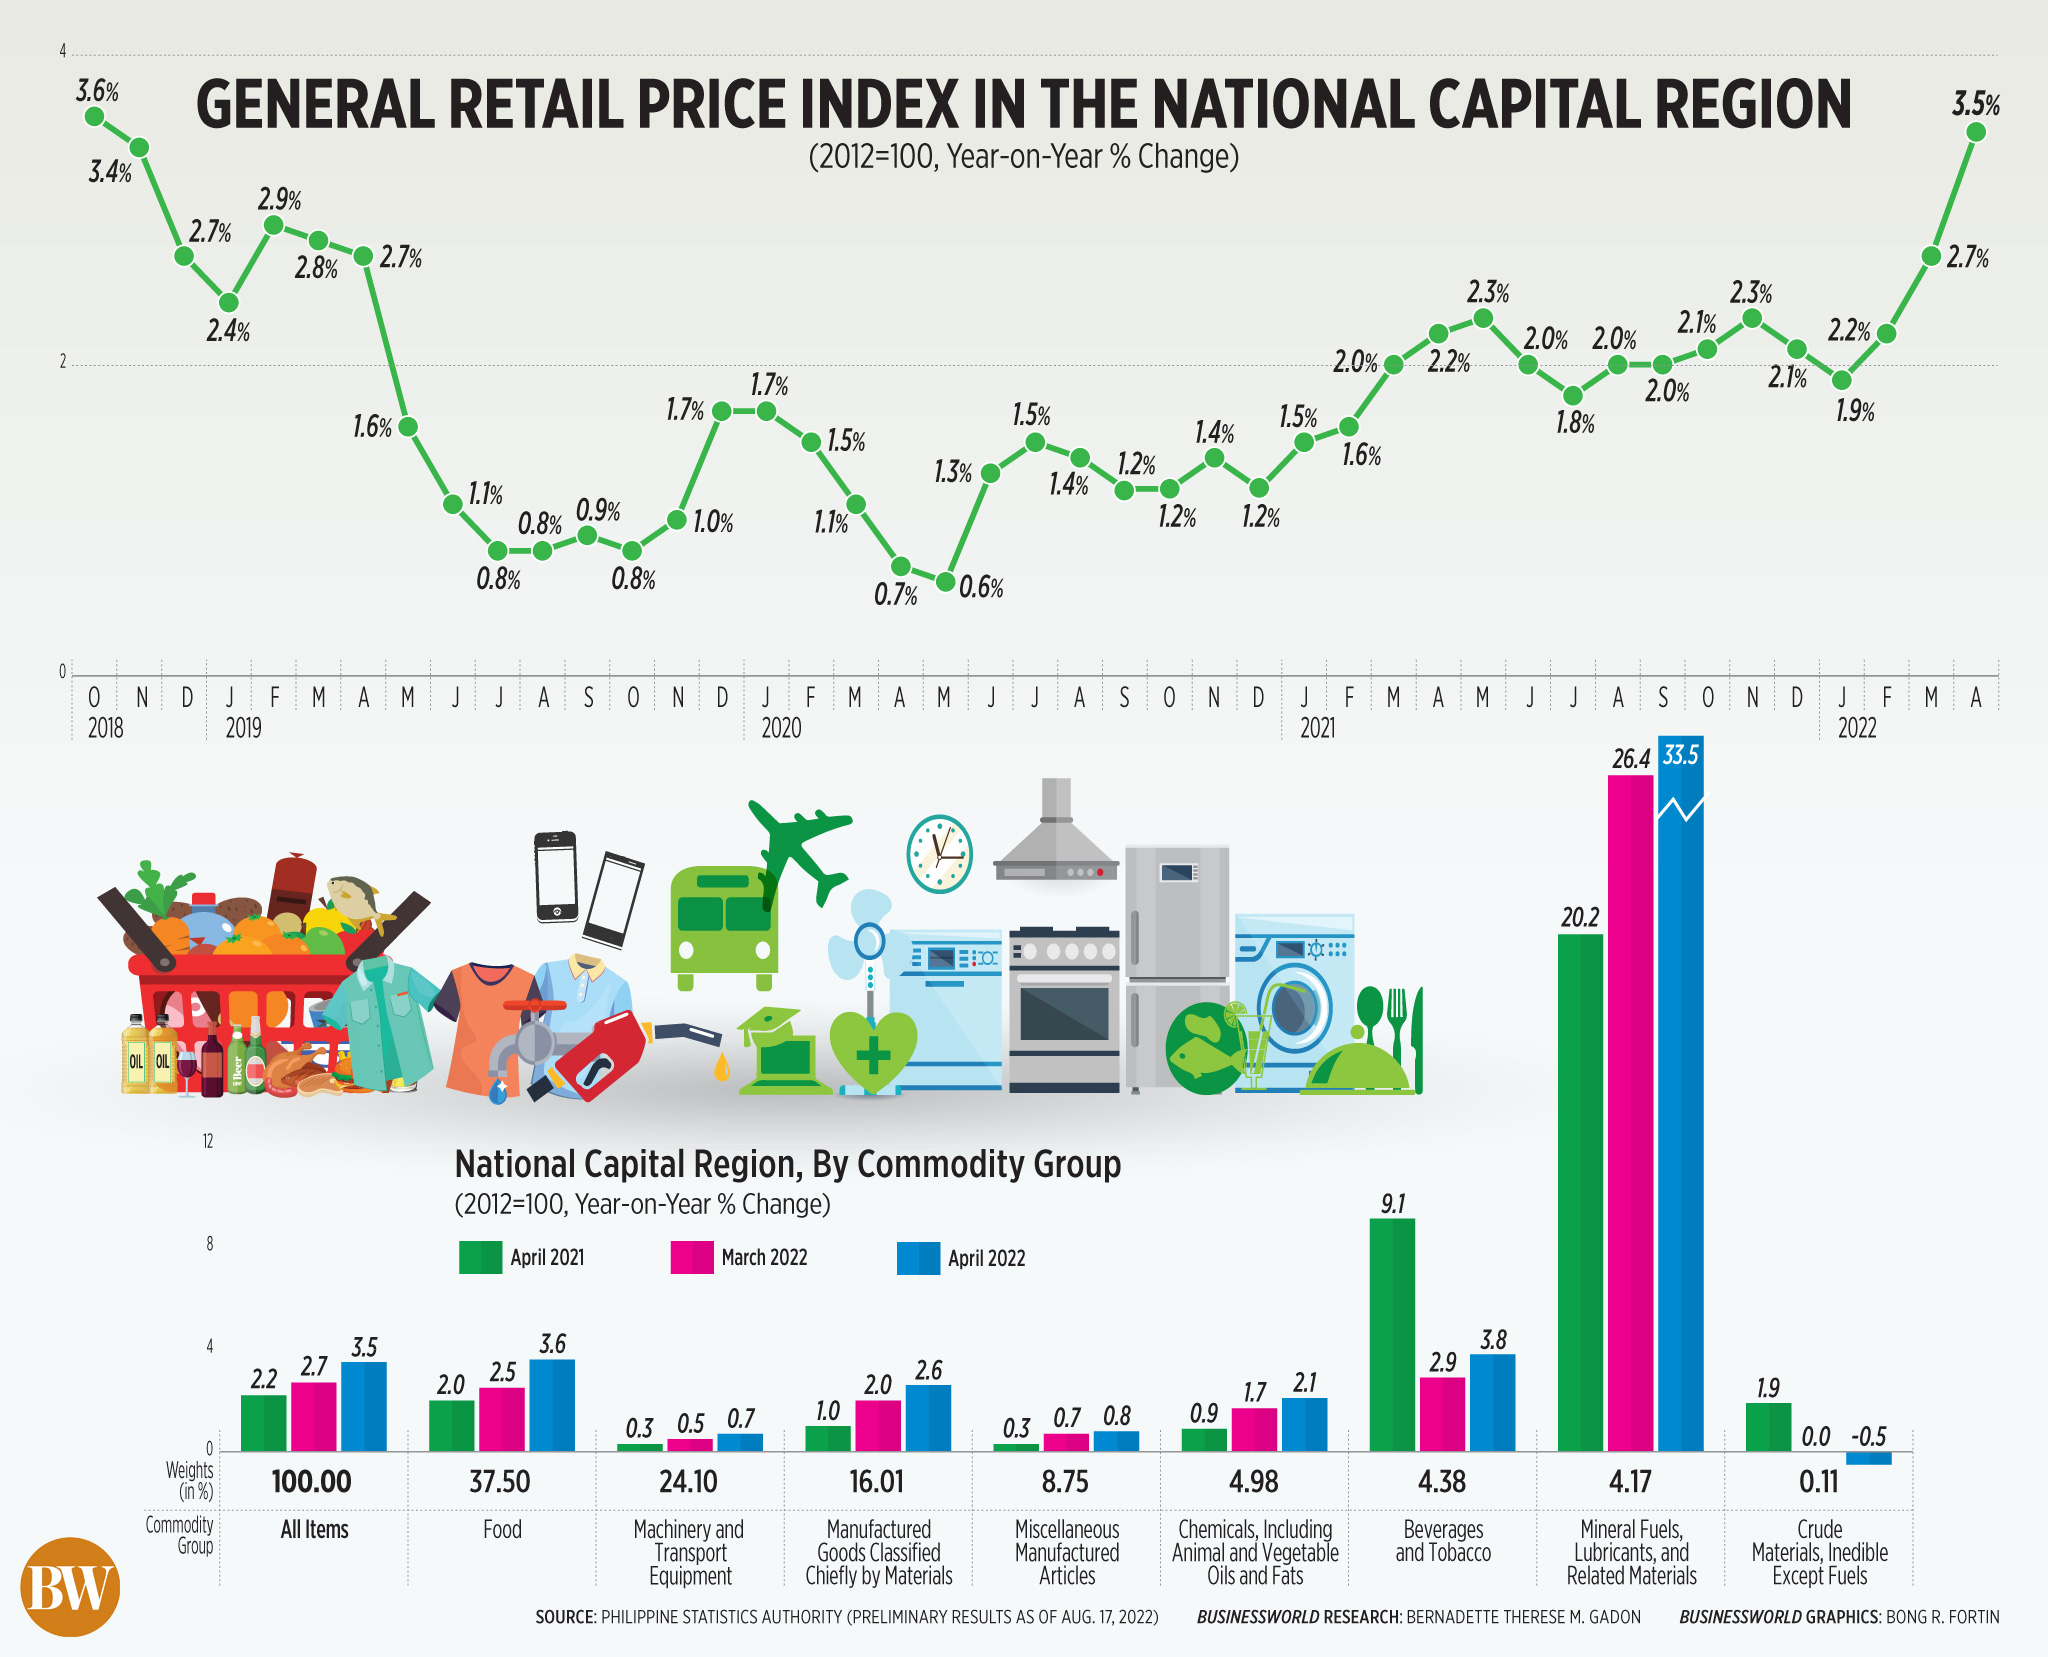 General retail price index in the National Capital Region